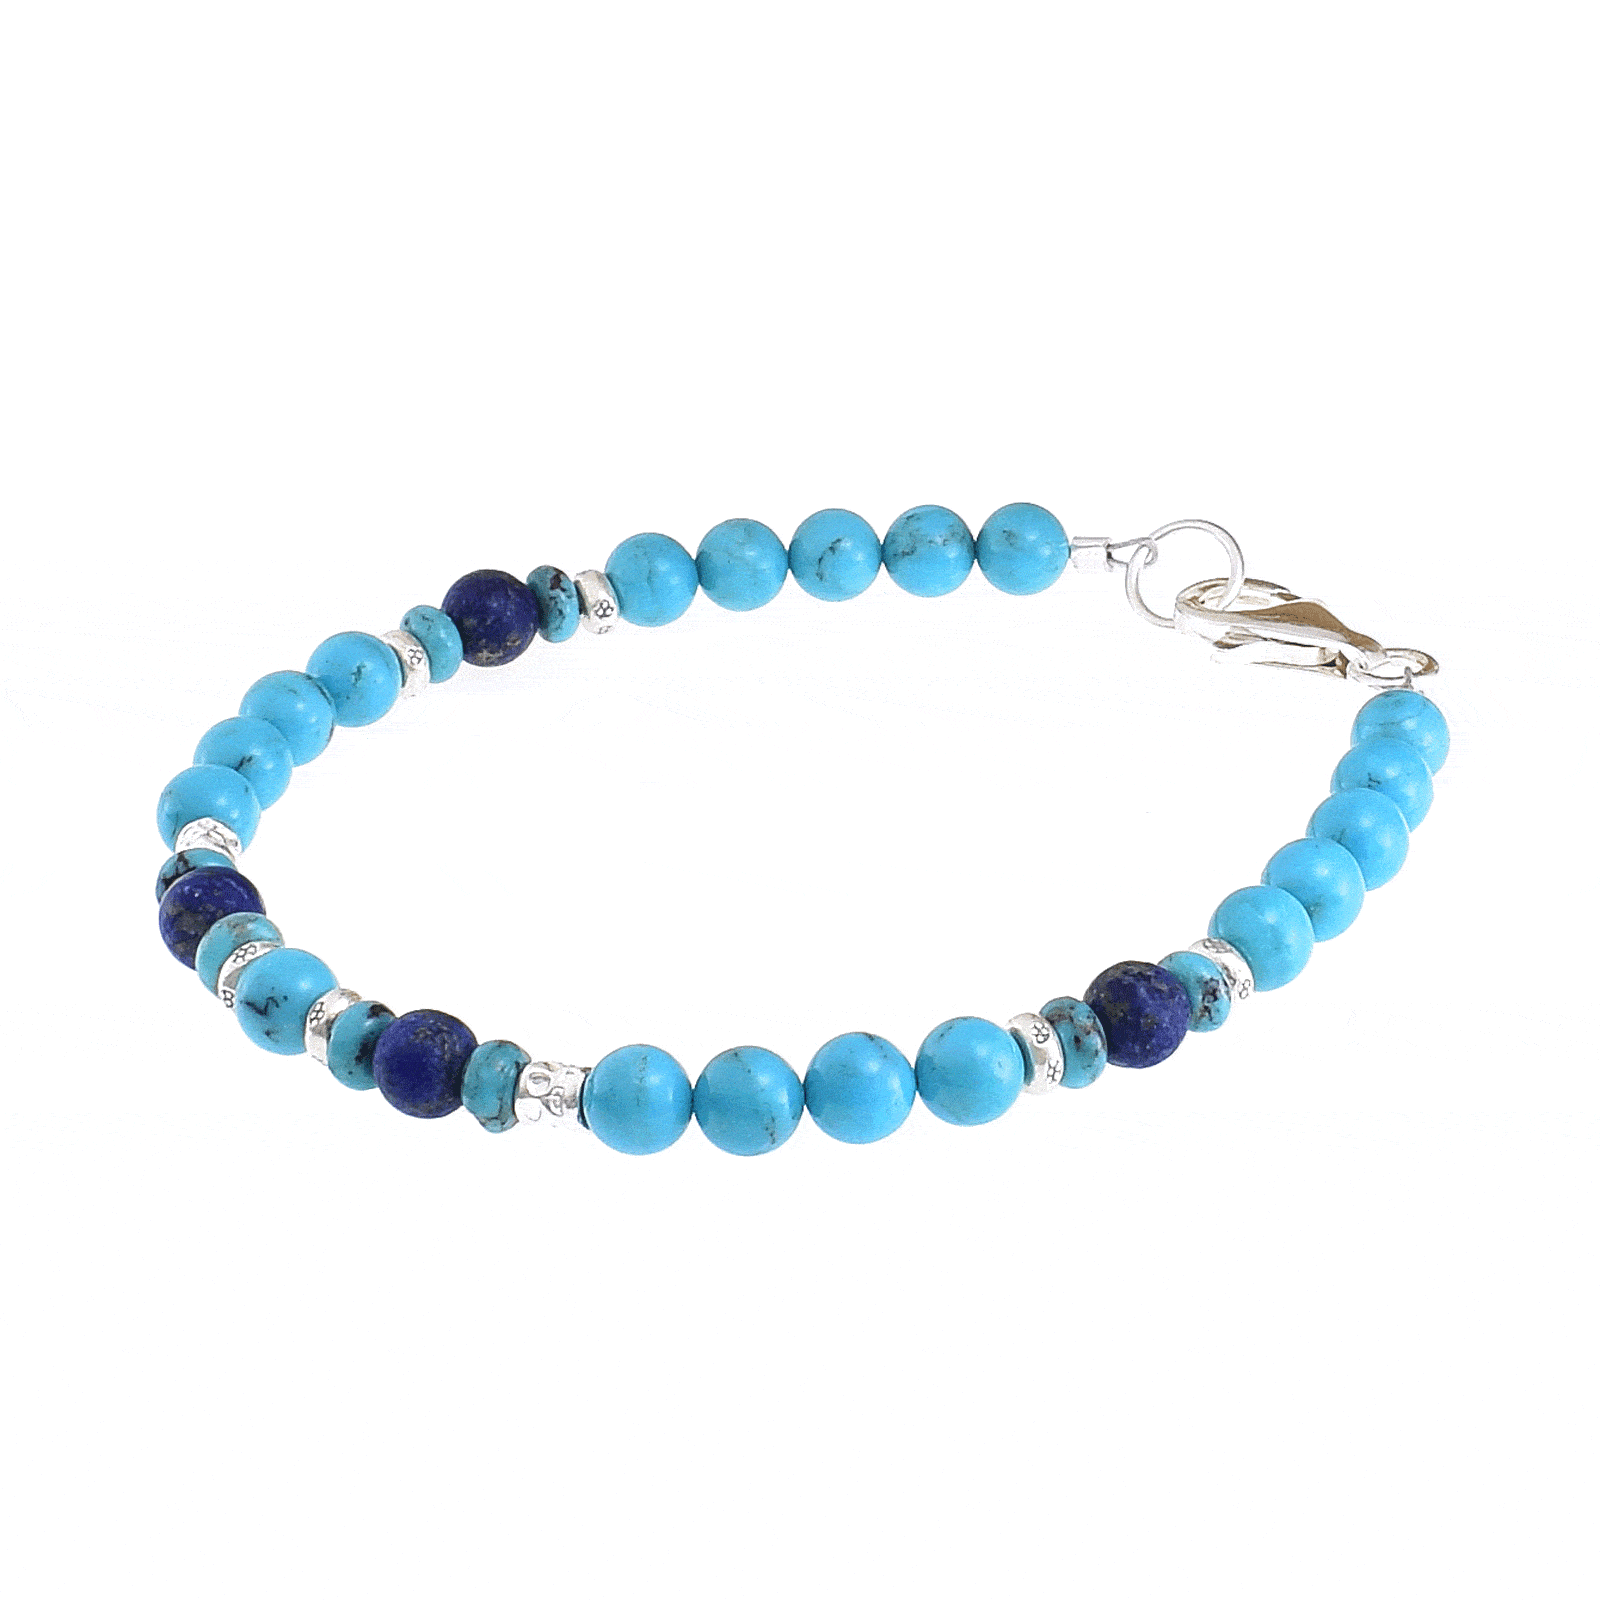 Handmade bracelet with natural Turquoise and Lapis Lazuli gemstones. The bracelet has decorative elements and clasp made of sterling silver. Buy online shop.